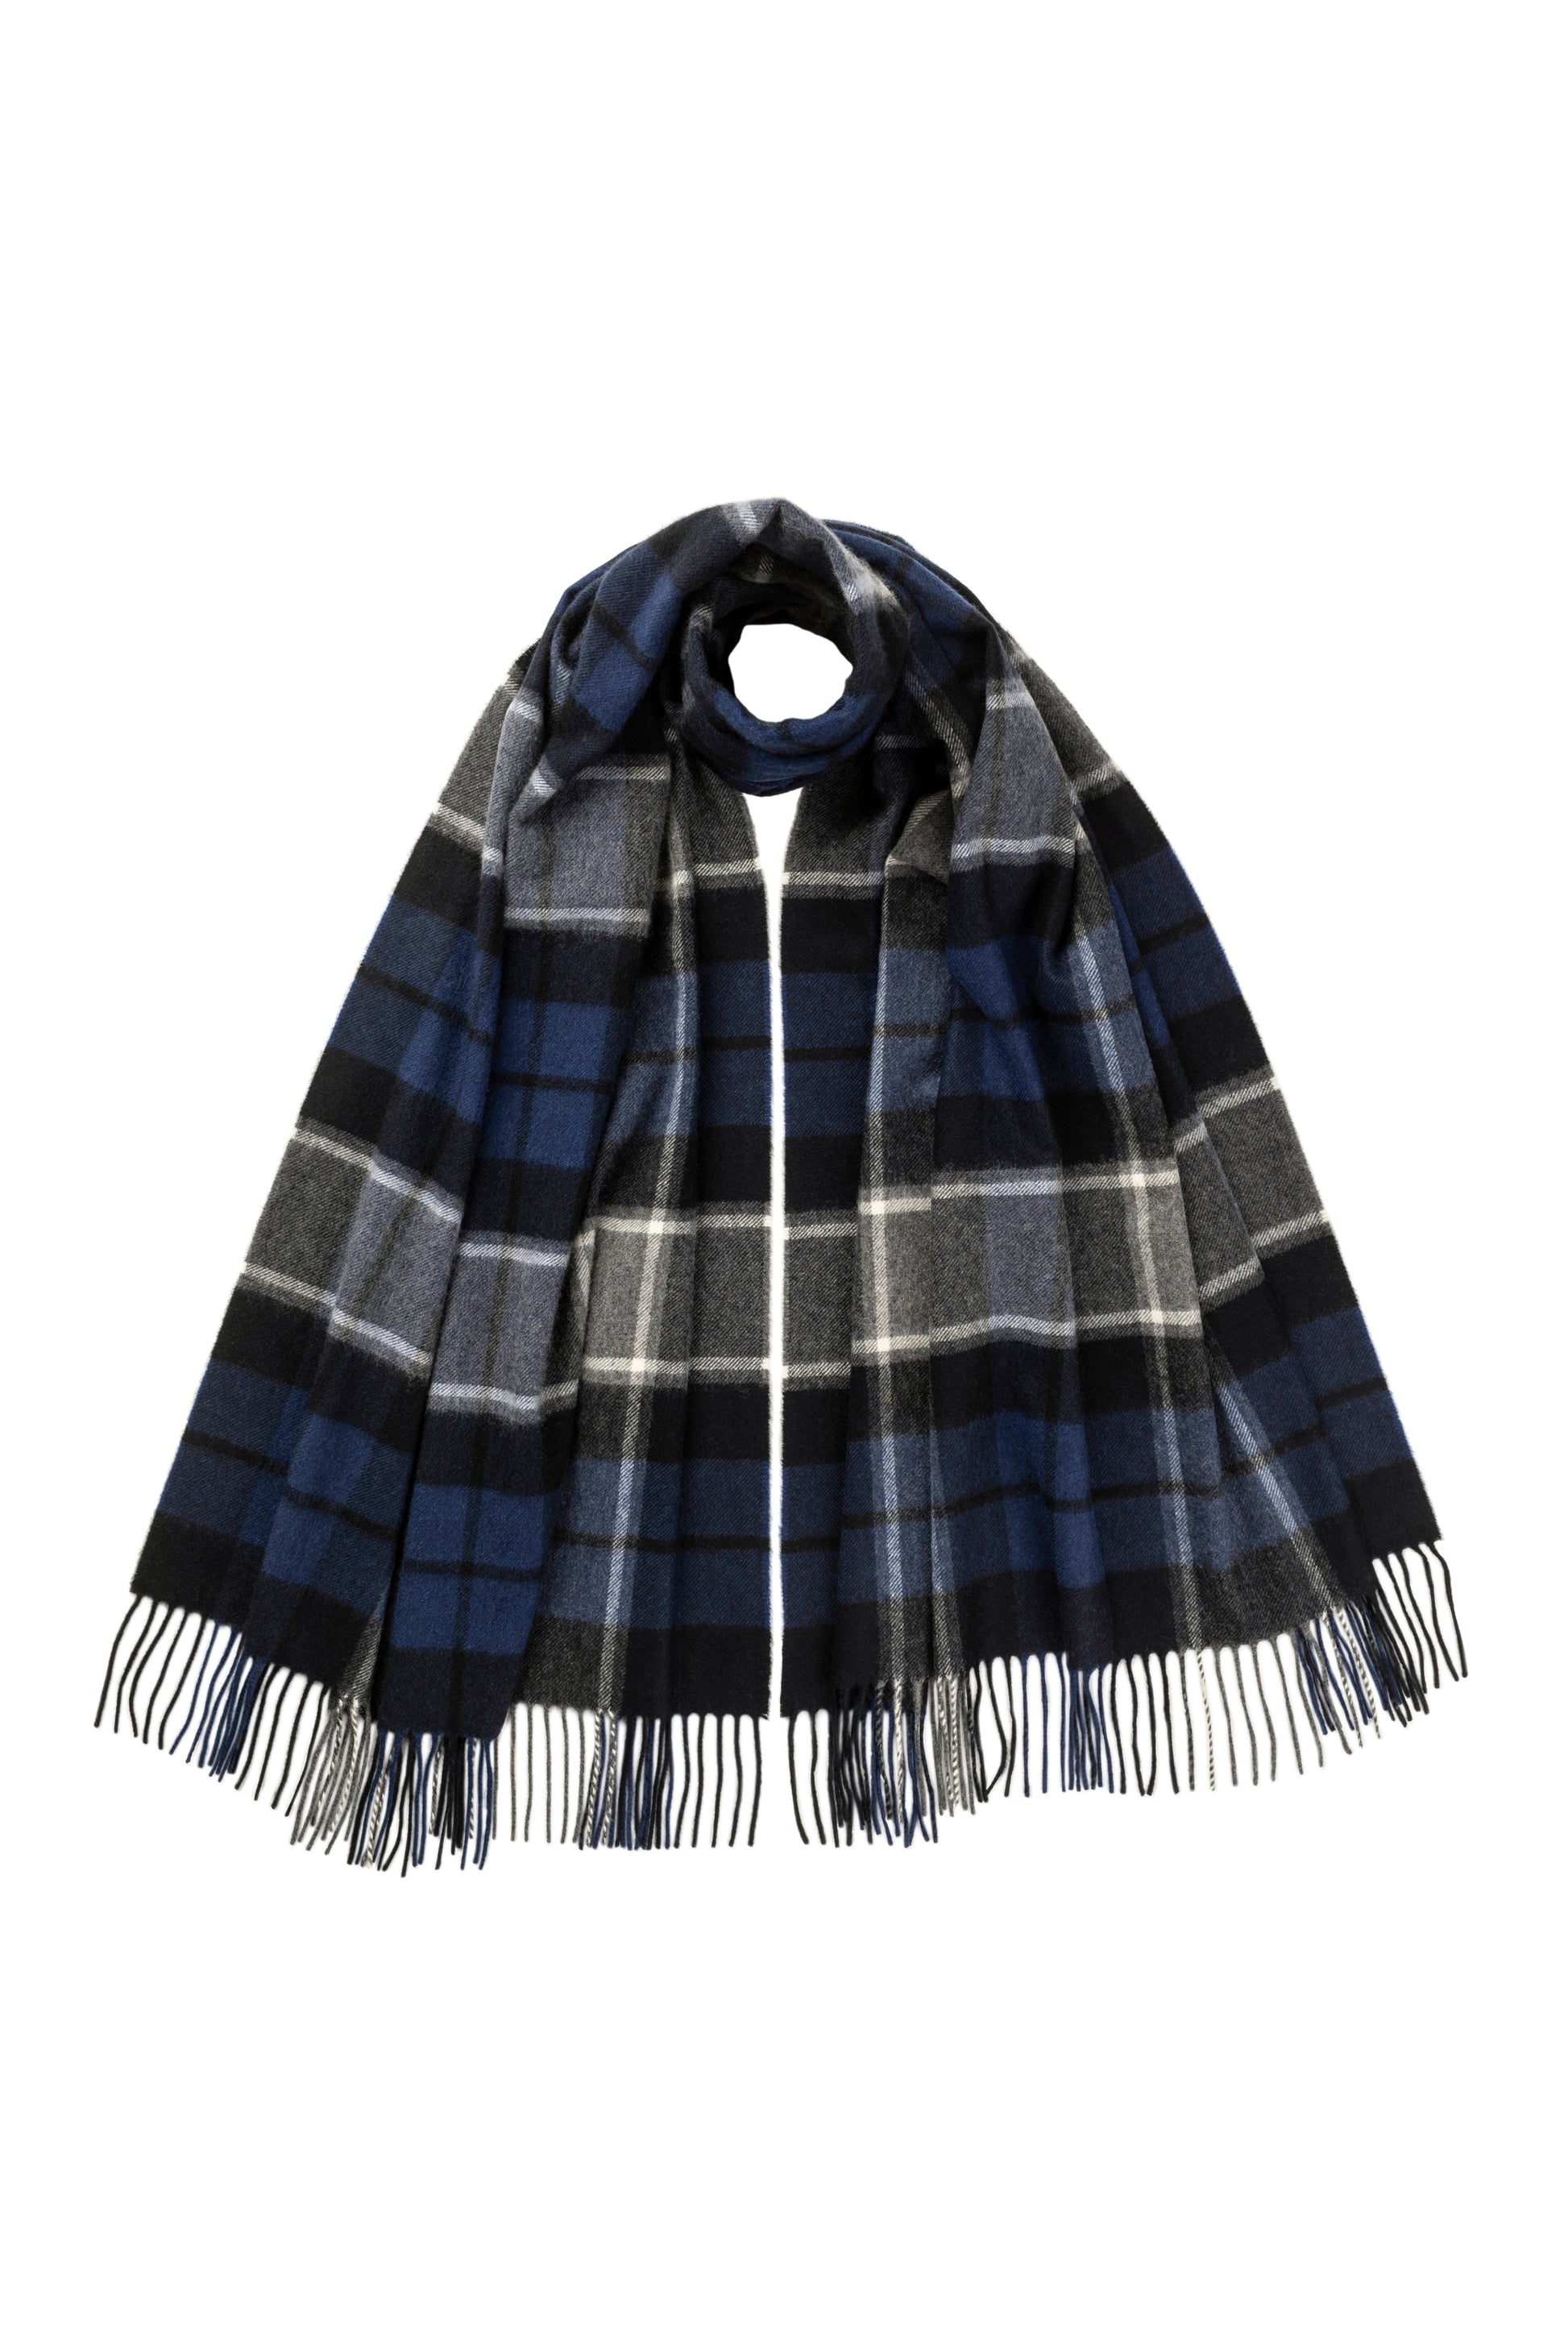 Johnstons of Elgin Tartan Cashmere Stole in Mentieth on a white background WA000056KU0127ONE